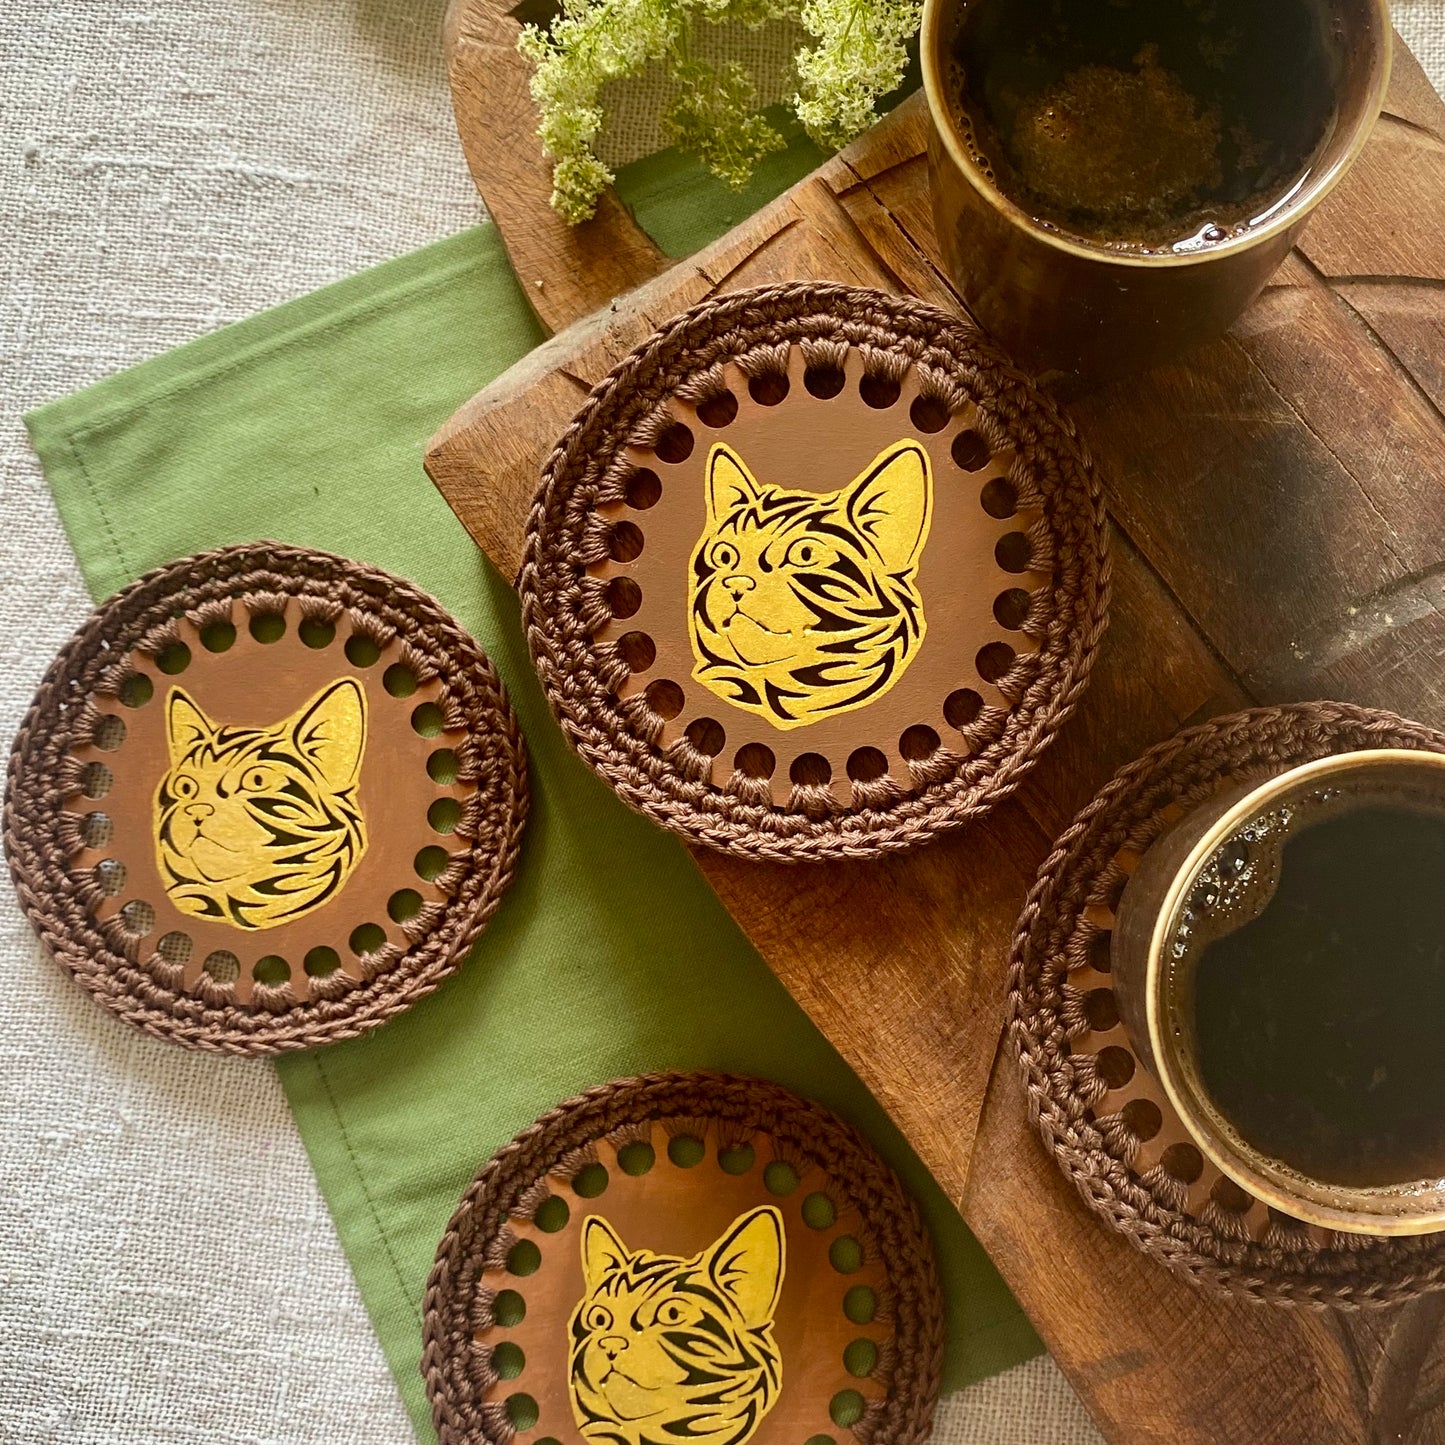 Wooden Gold Cat Coaster - Gift for Cat Lovers - First Home Gift - Kitchen Table Decor - Housewarming Gift - Wedding Gift Idea